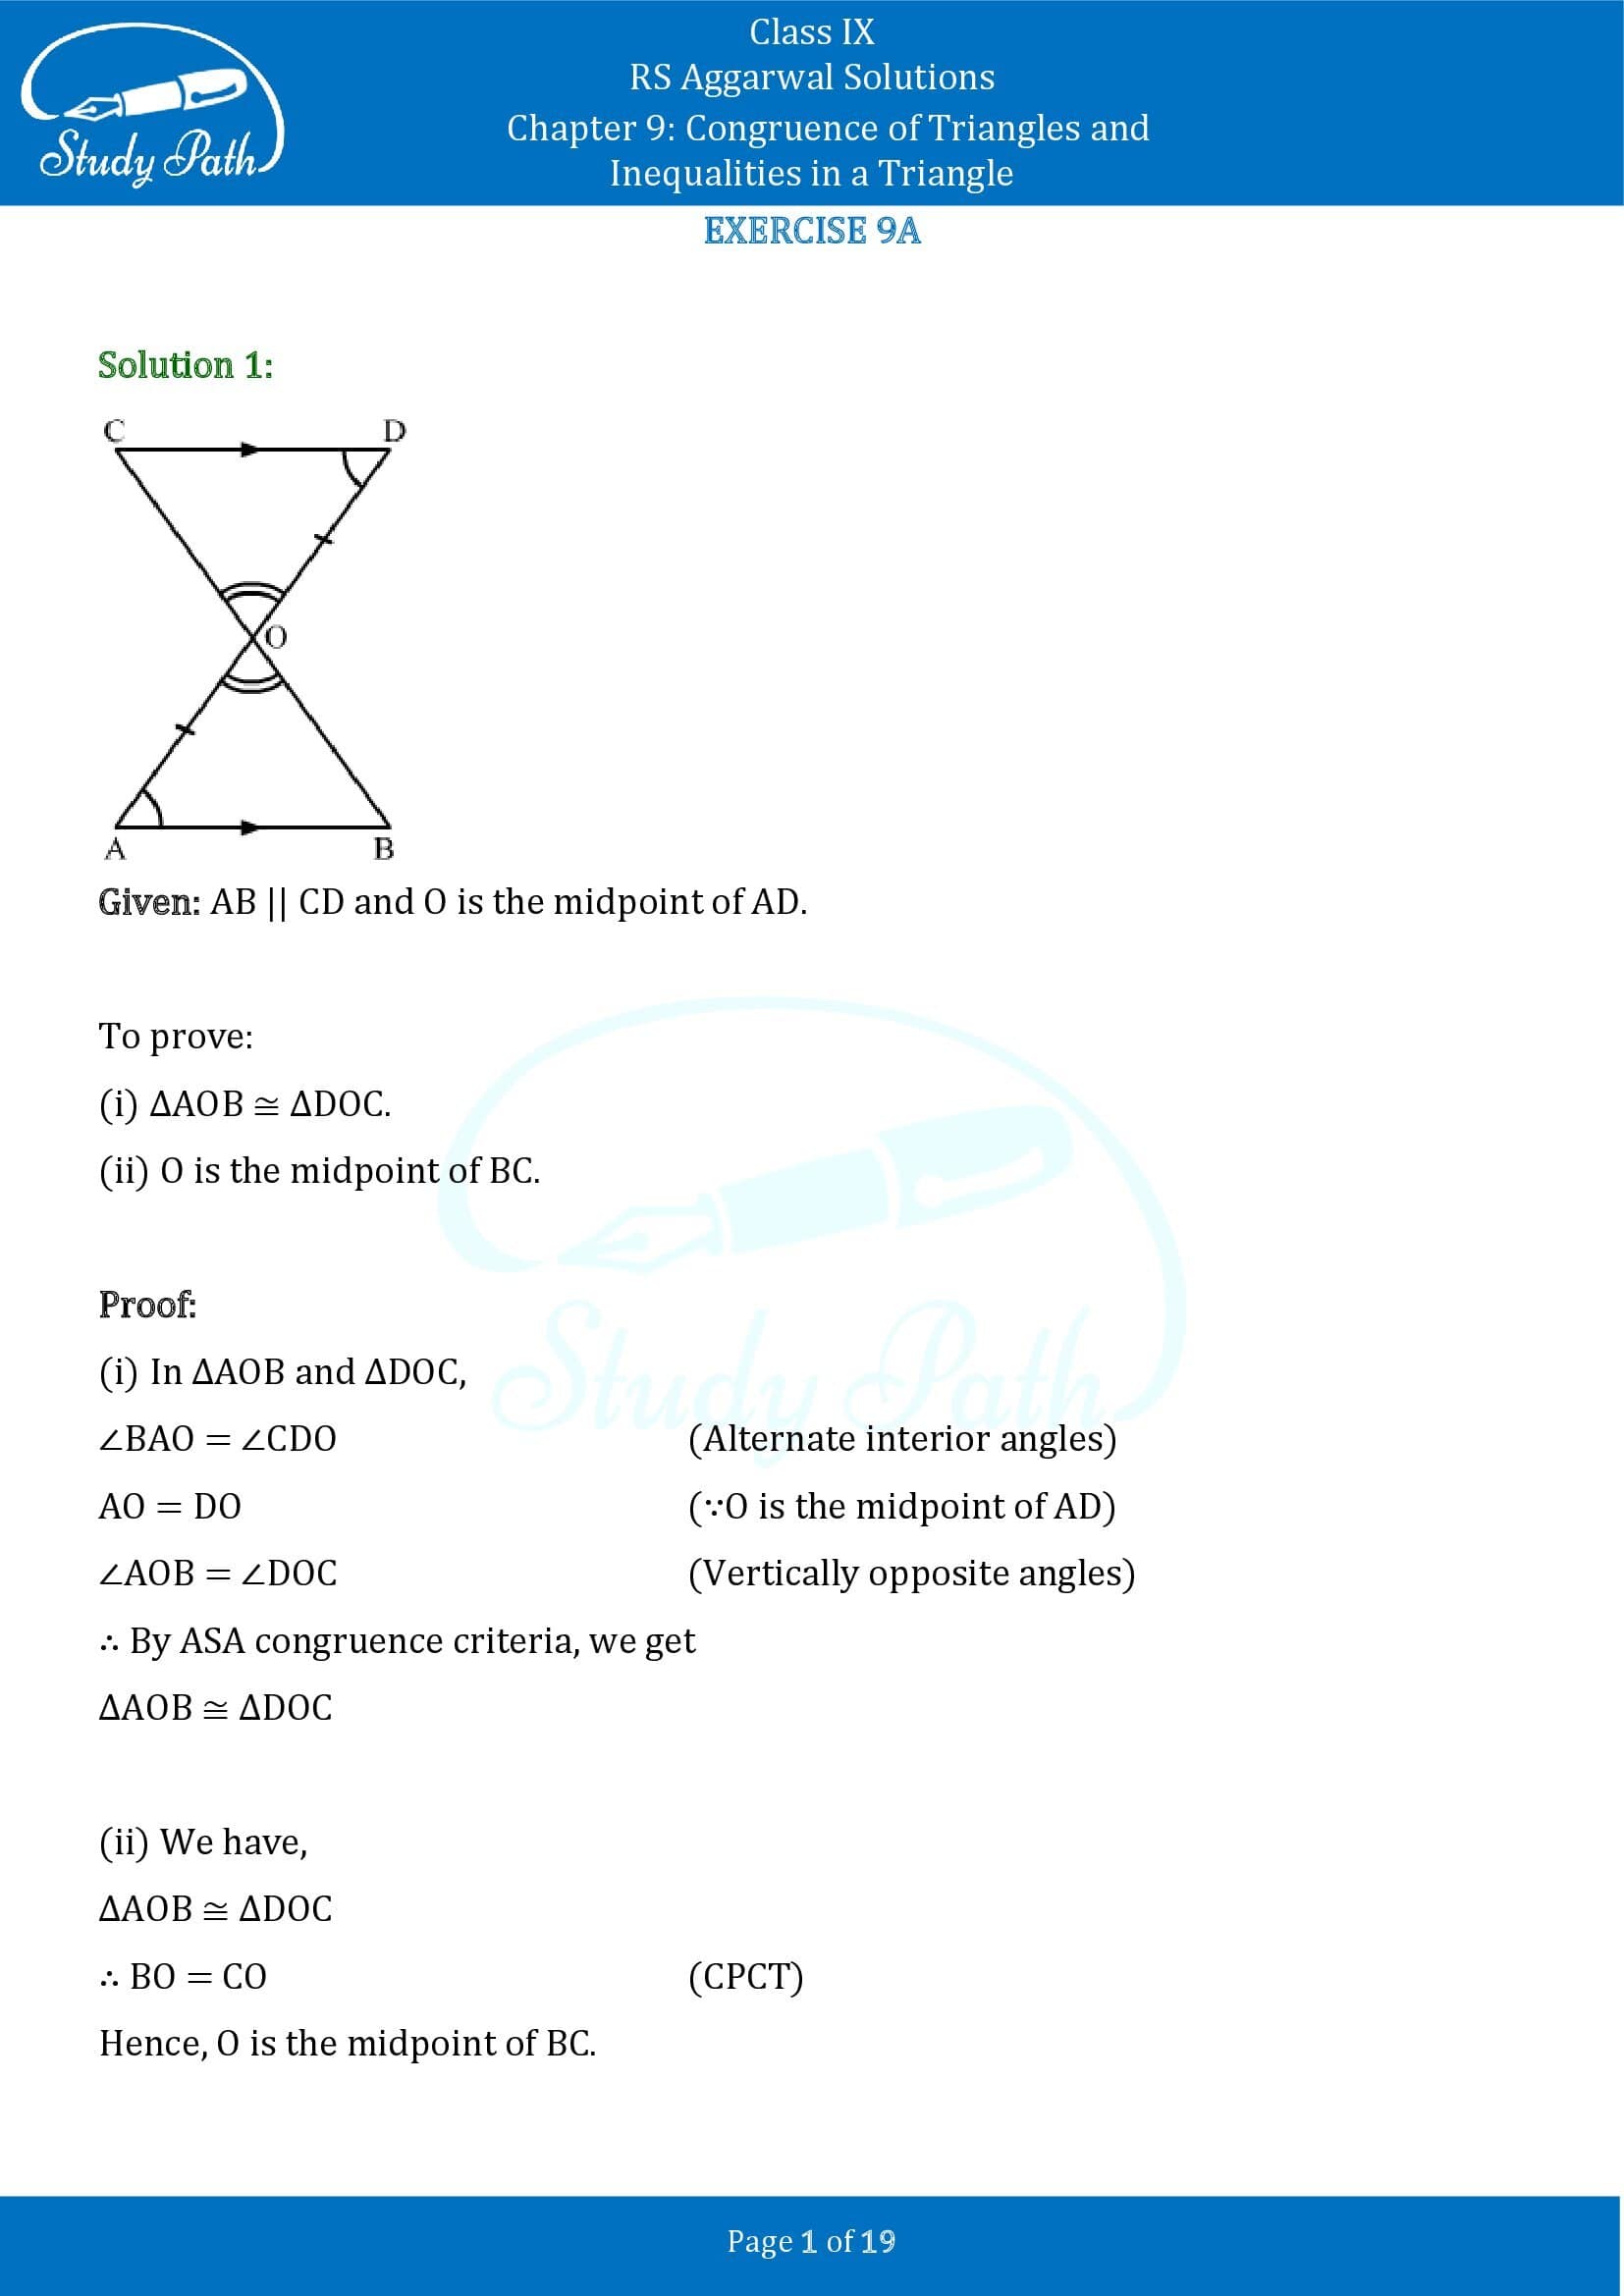 RS Aggarwal Solutions Class 9 Chapter 9 Congruence of Triangles and Inequalities in a Triangle Exercise 9A 0001